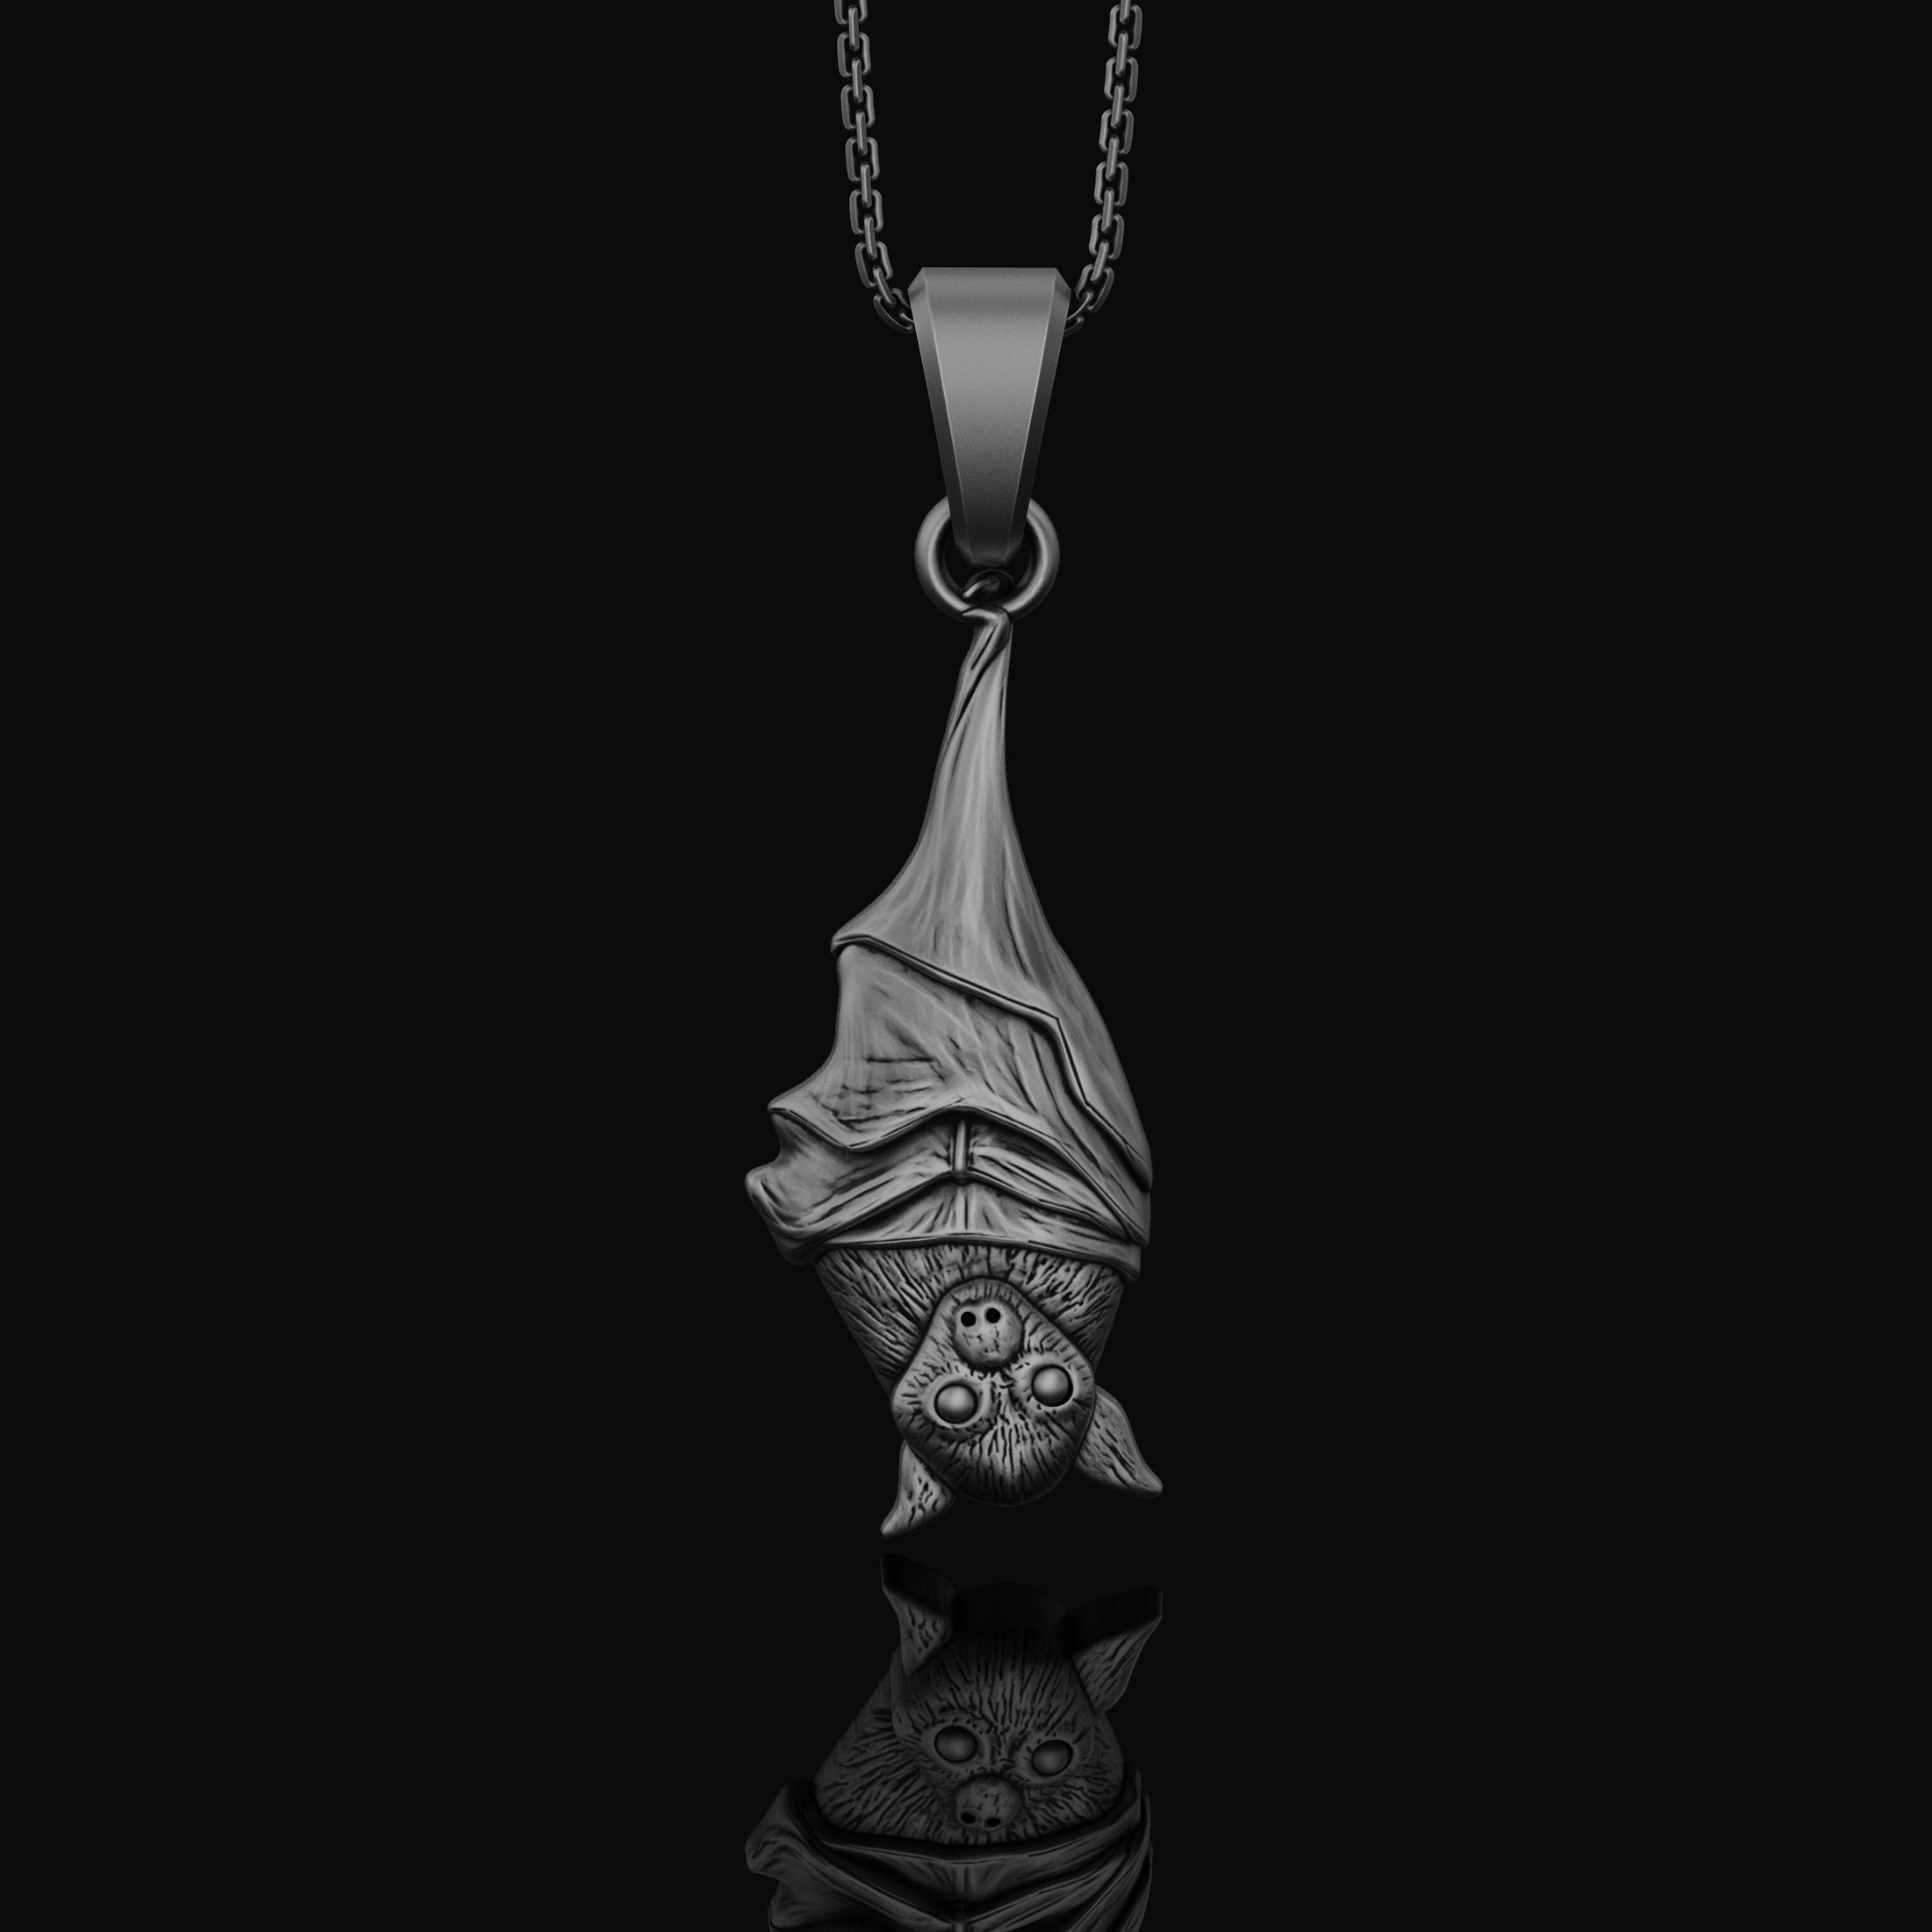 Silver Hanging Bat Necklace - Elegant Gothic Bat Pendant, Spooky Nocturnal Creature Charm, Vampire Inspired Dark Style Jewelry